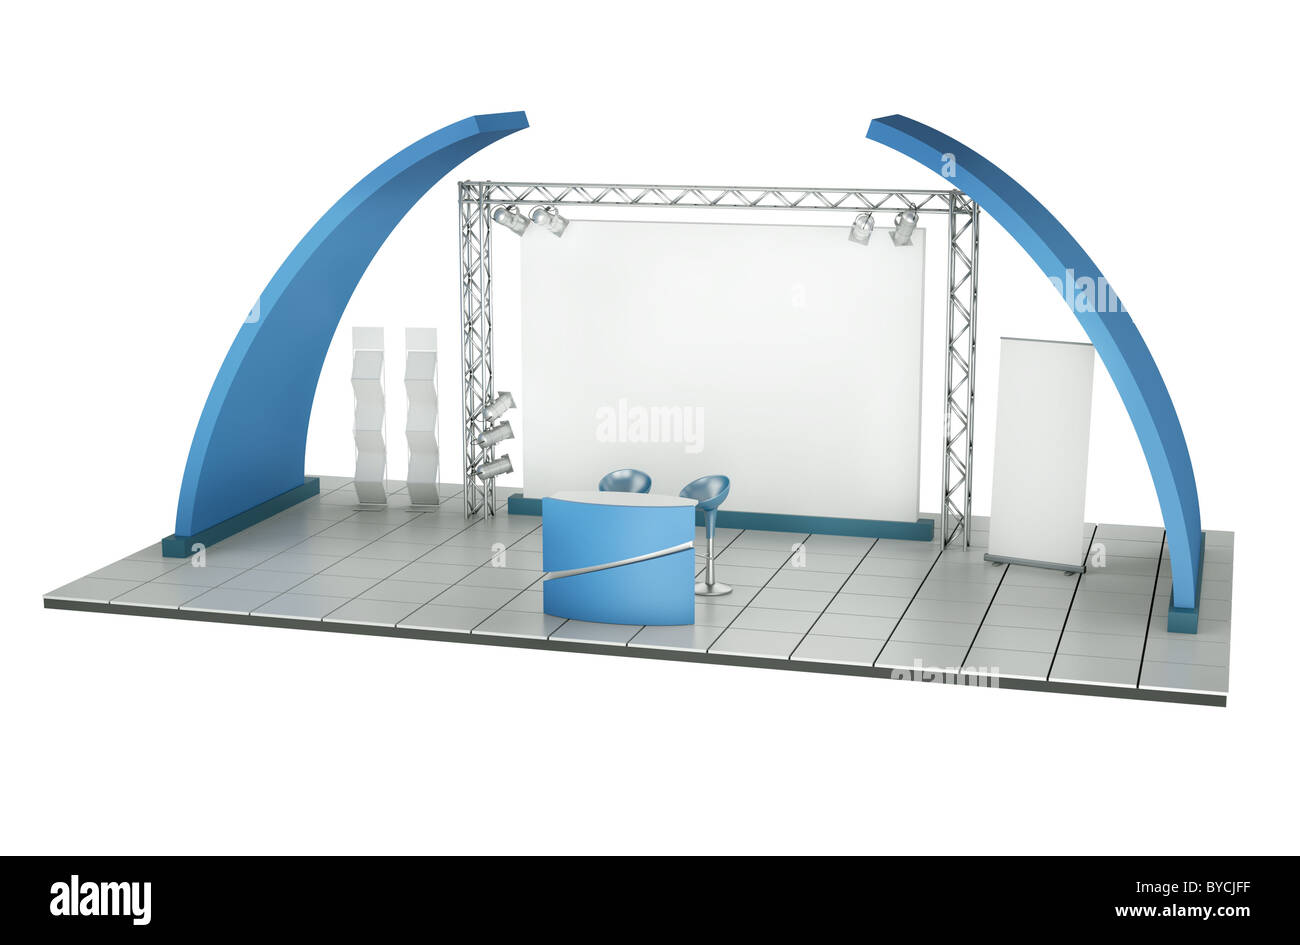 Trade Exhibition Stand isolated on a white background. 3D rendered illustration. Stock Photo